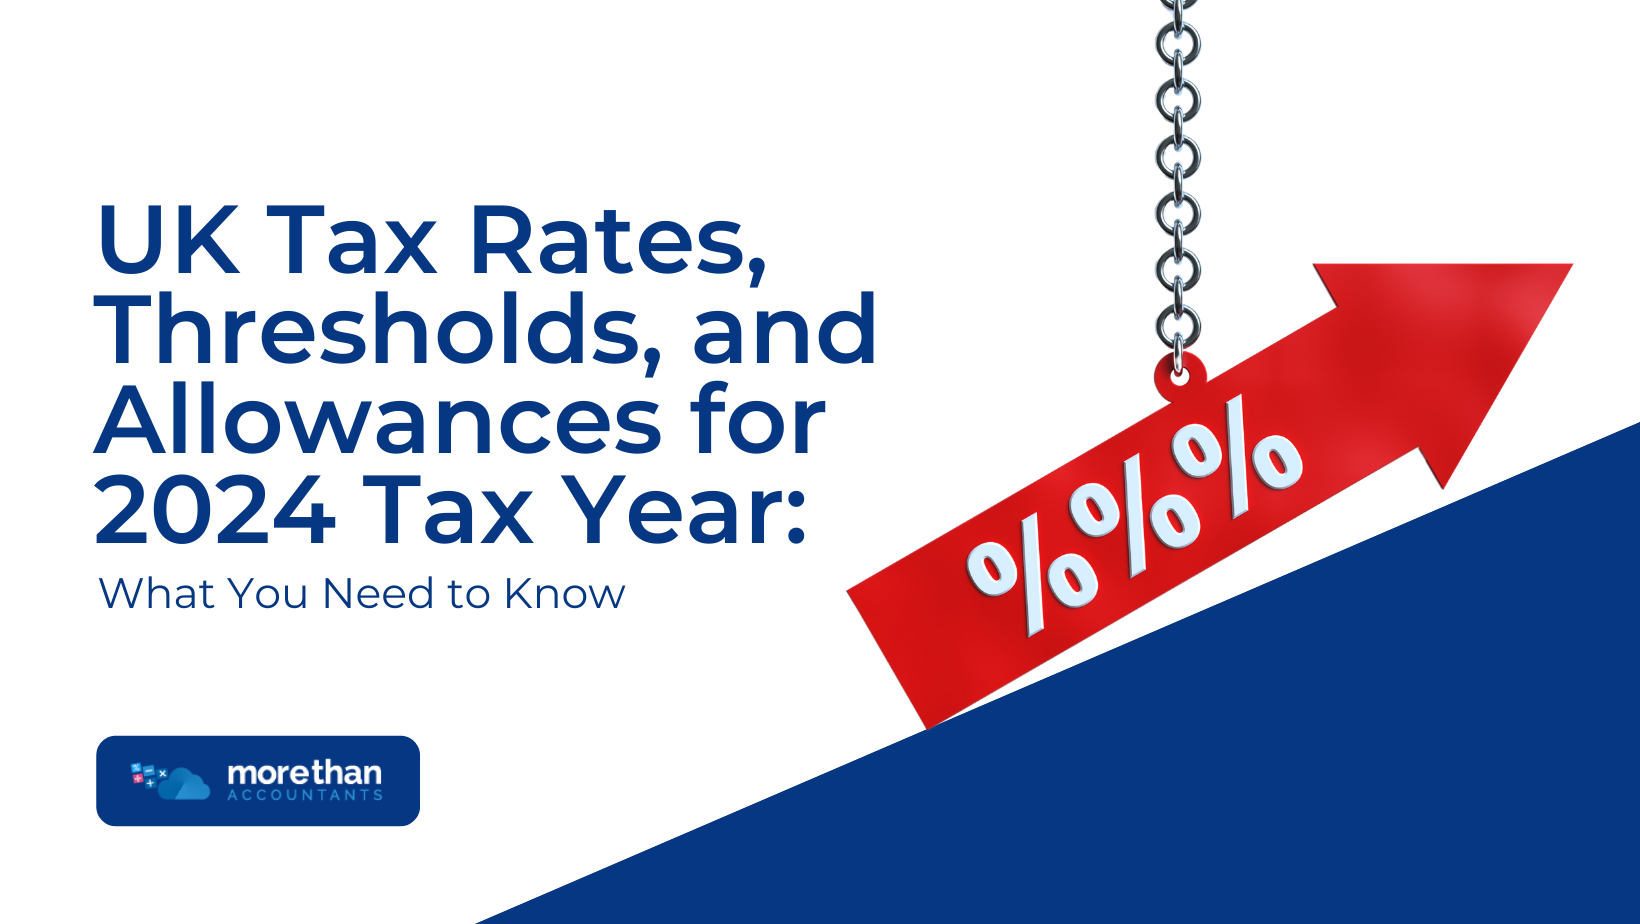 UK Tax Rates, Thresholds, and Allowances for 2024 Tax Year What You